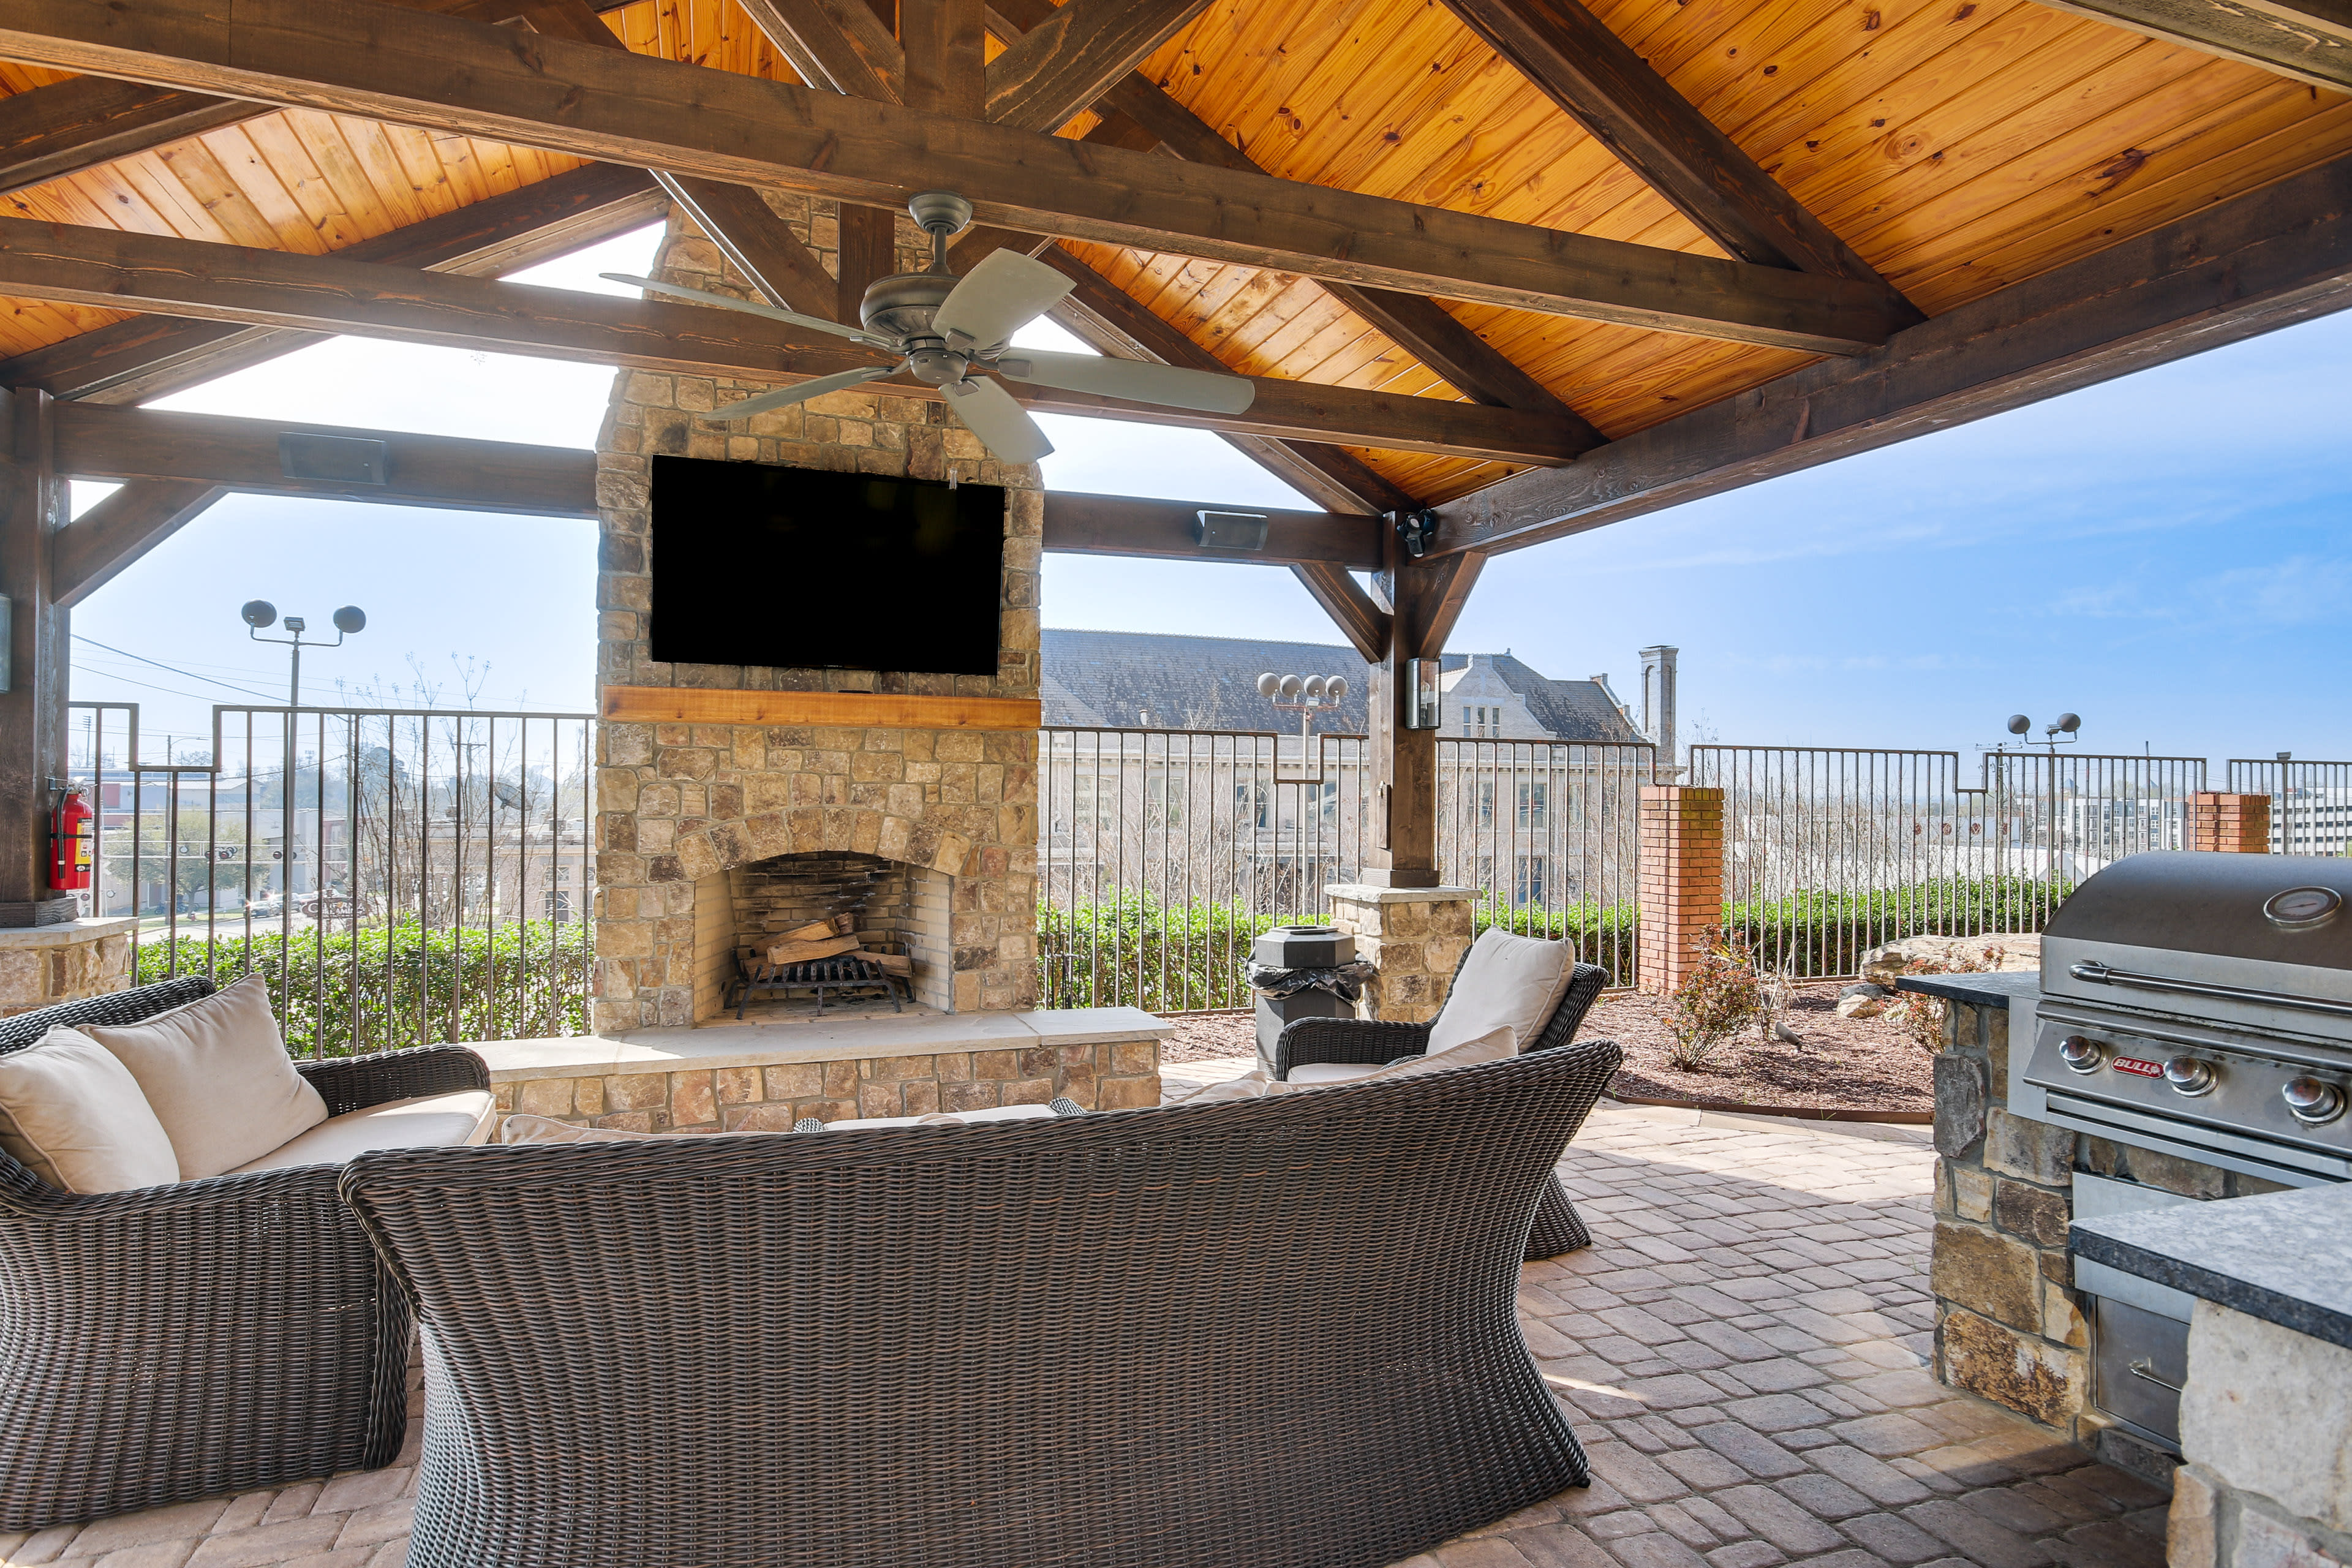 Community Pavilion | Outdoor Fireplace | Gas Grill